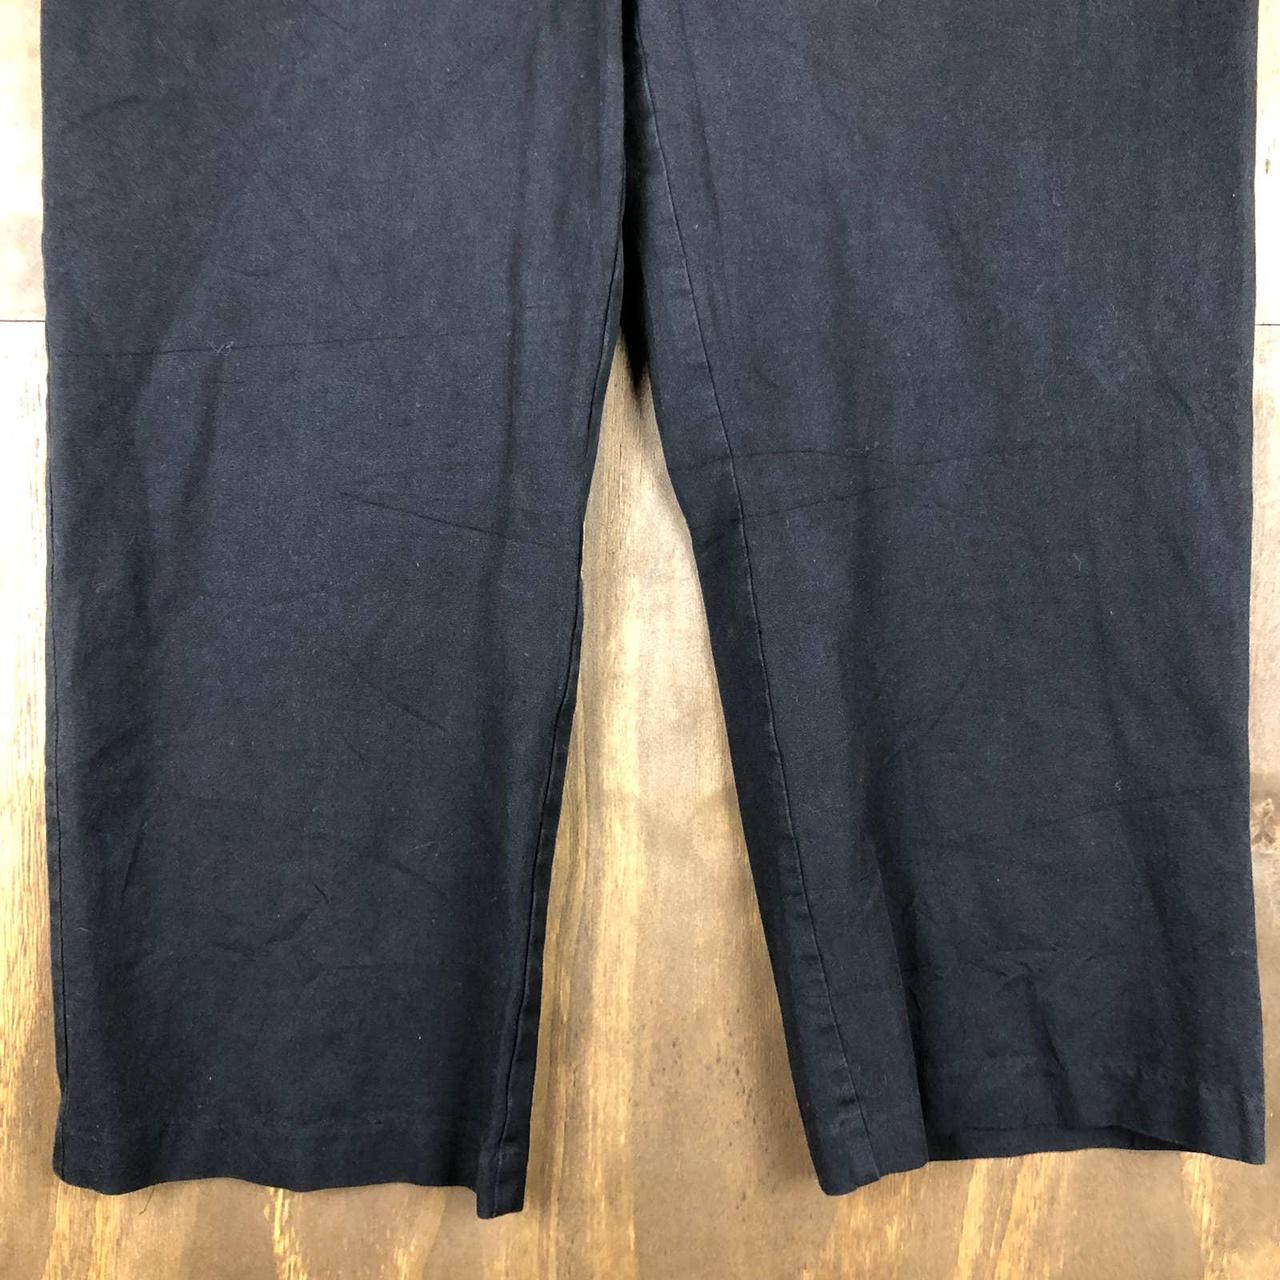 Chicos So Slimming Pull On Stretch Pants Women 1.5 - Depop